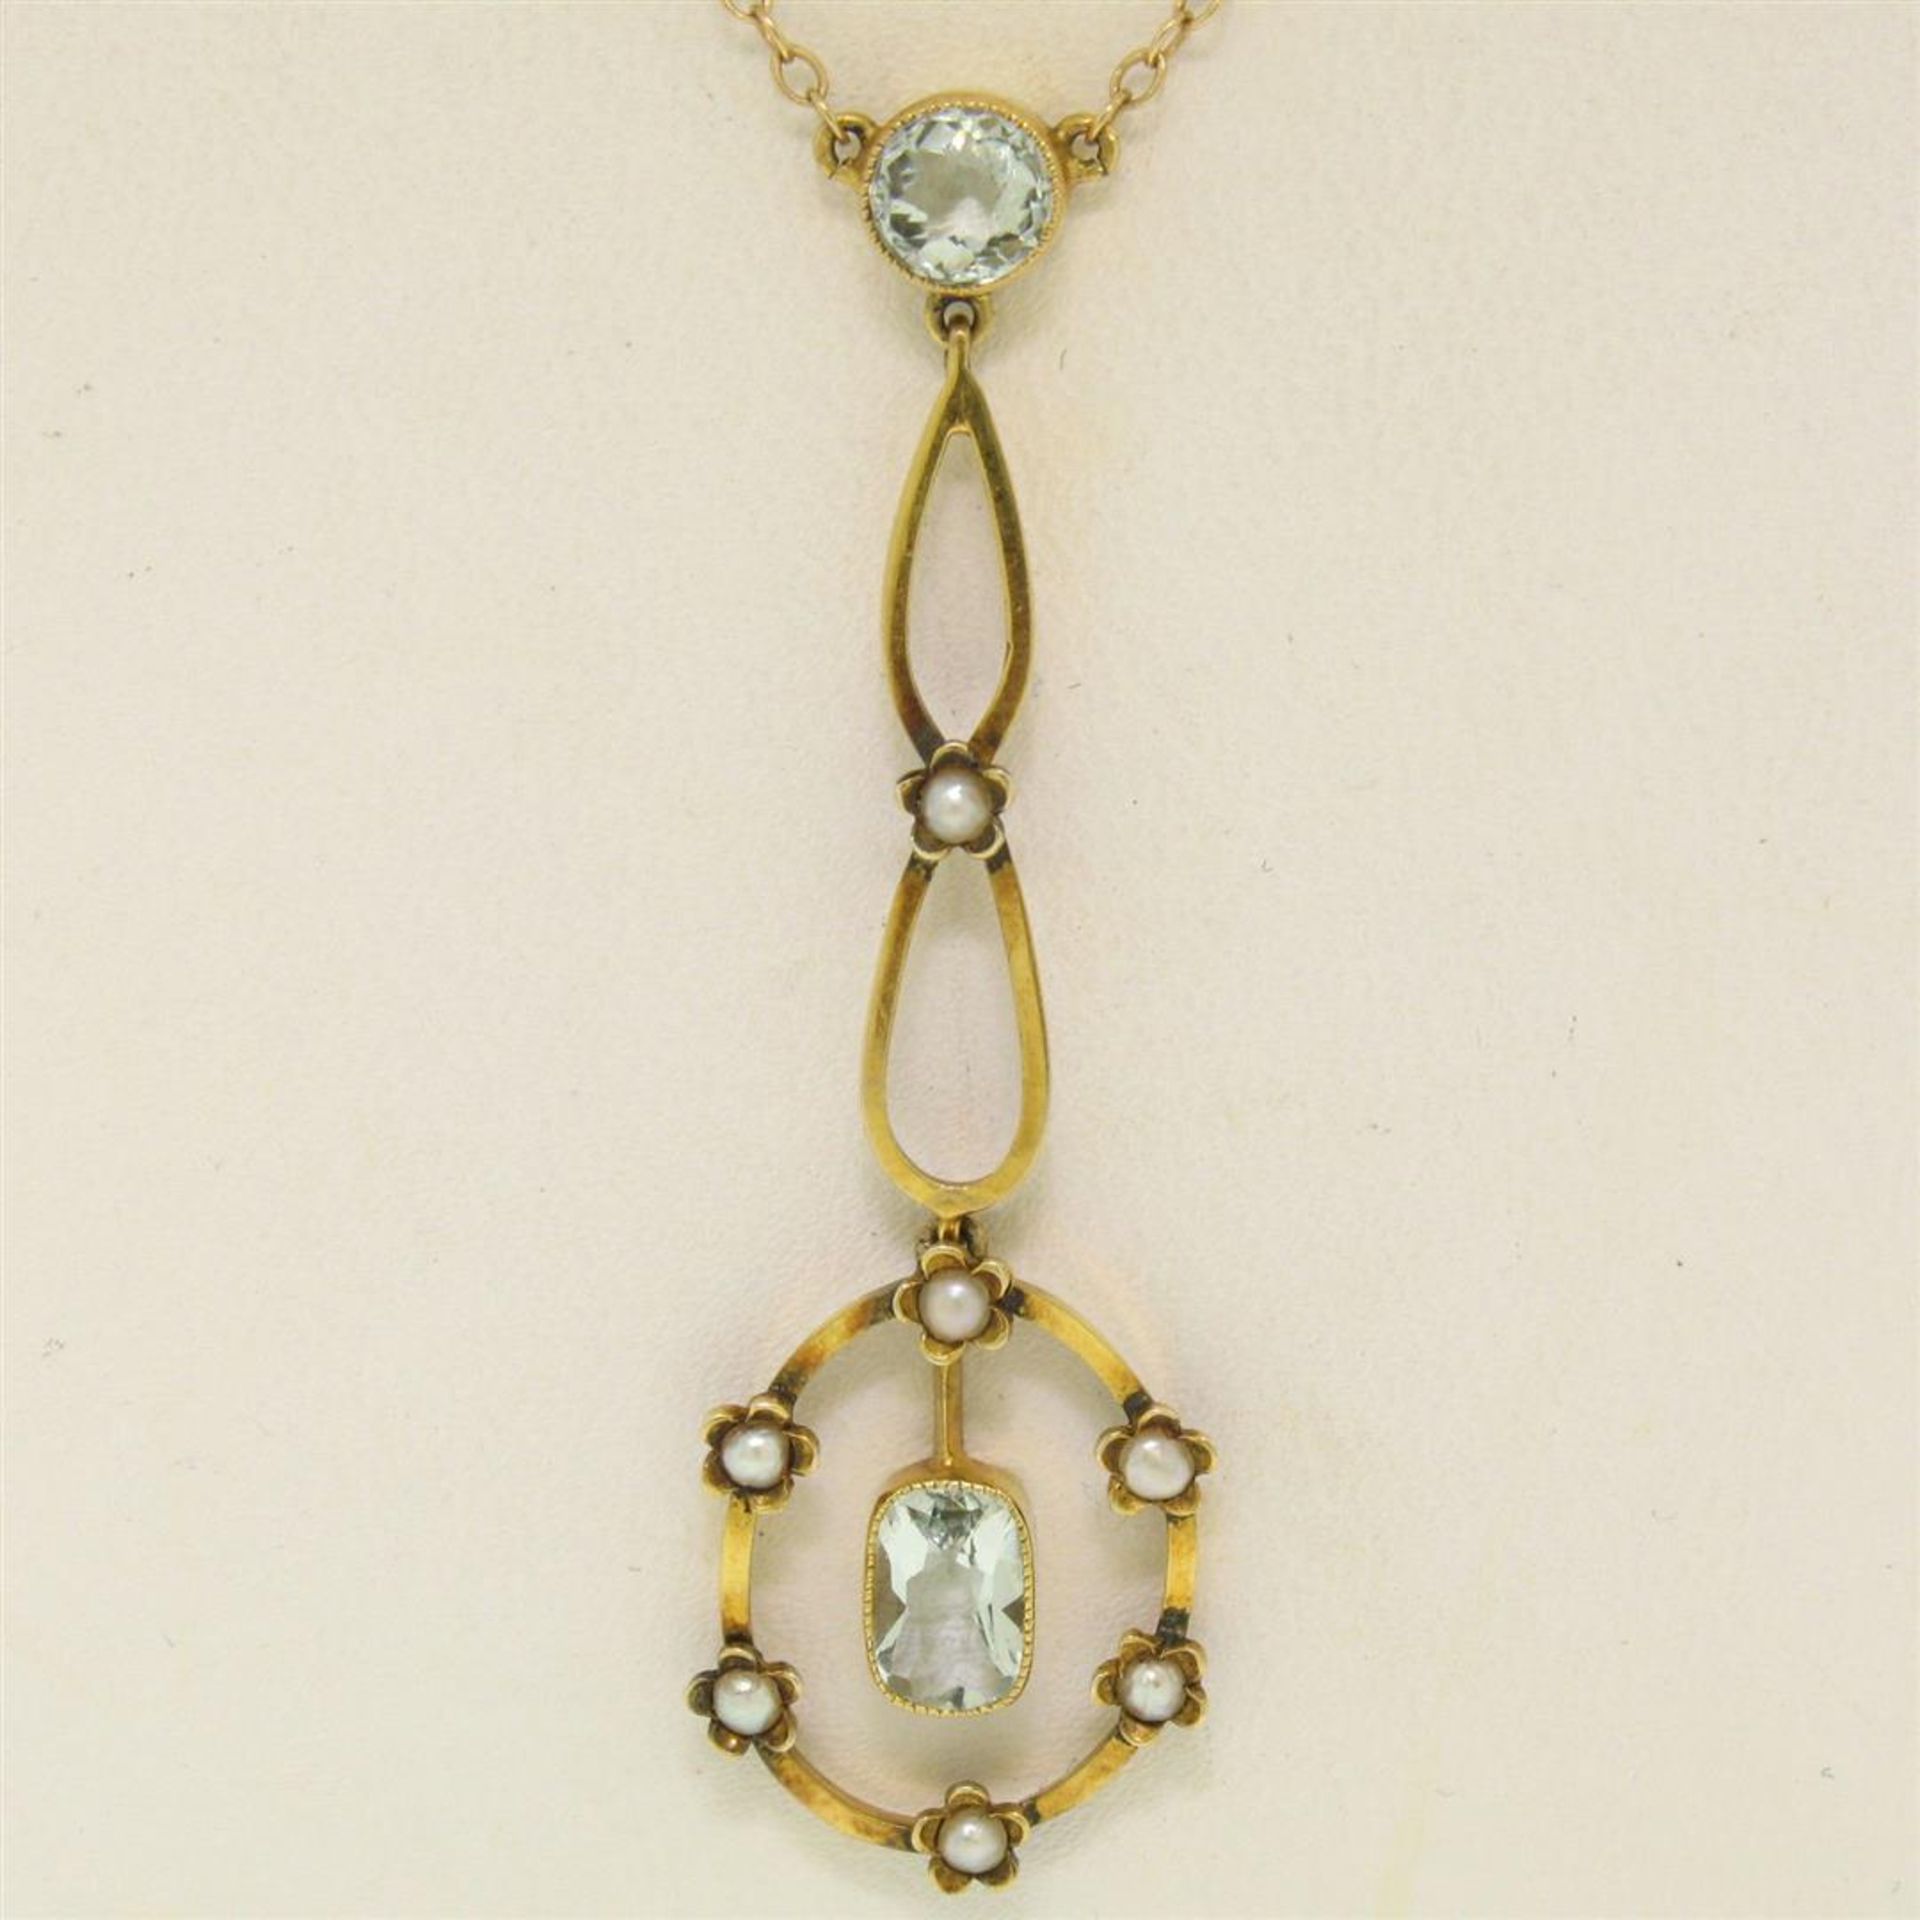 Antique Victorian 10k Yellow Gold Aquamarine Seed Pearl Dangle Pendant Necklace - Image 3 of 9